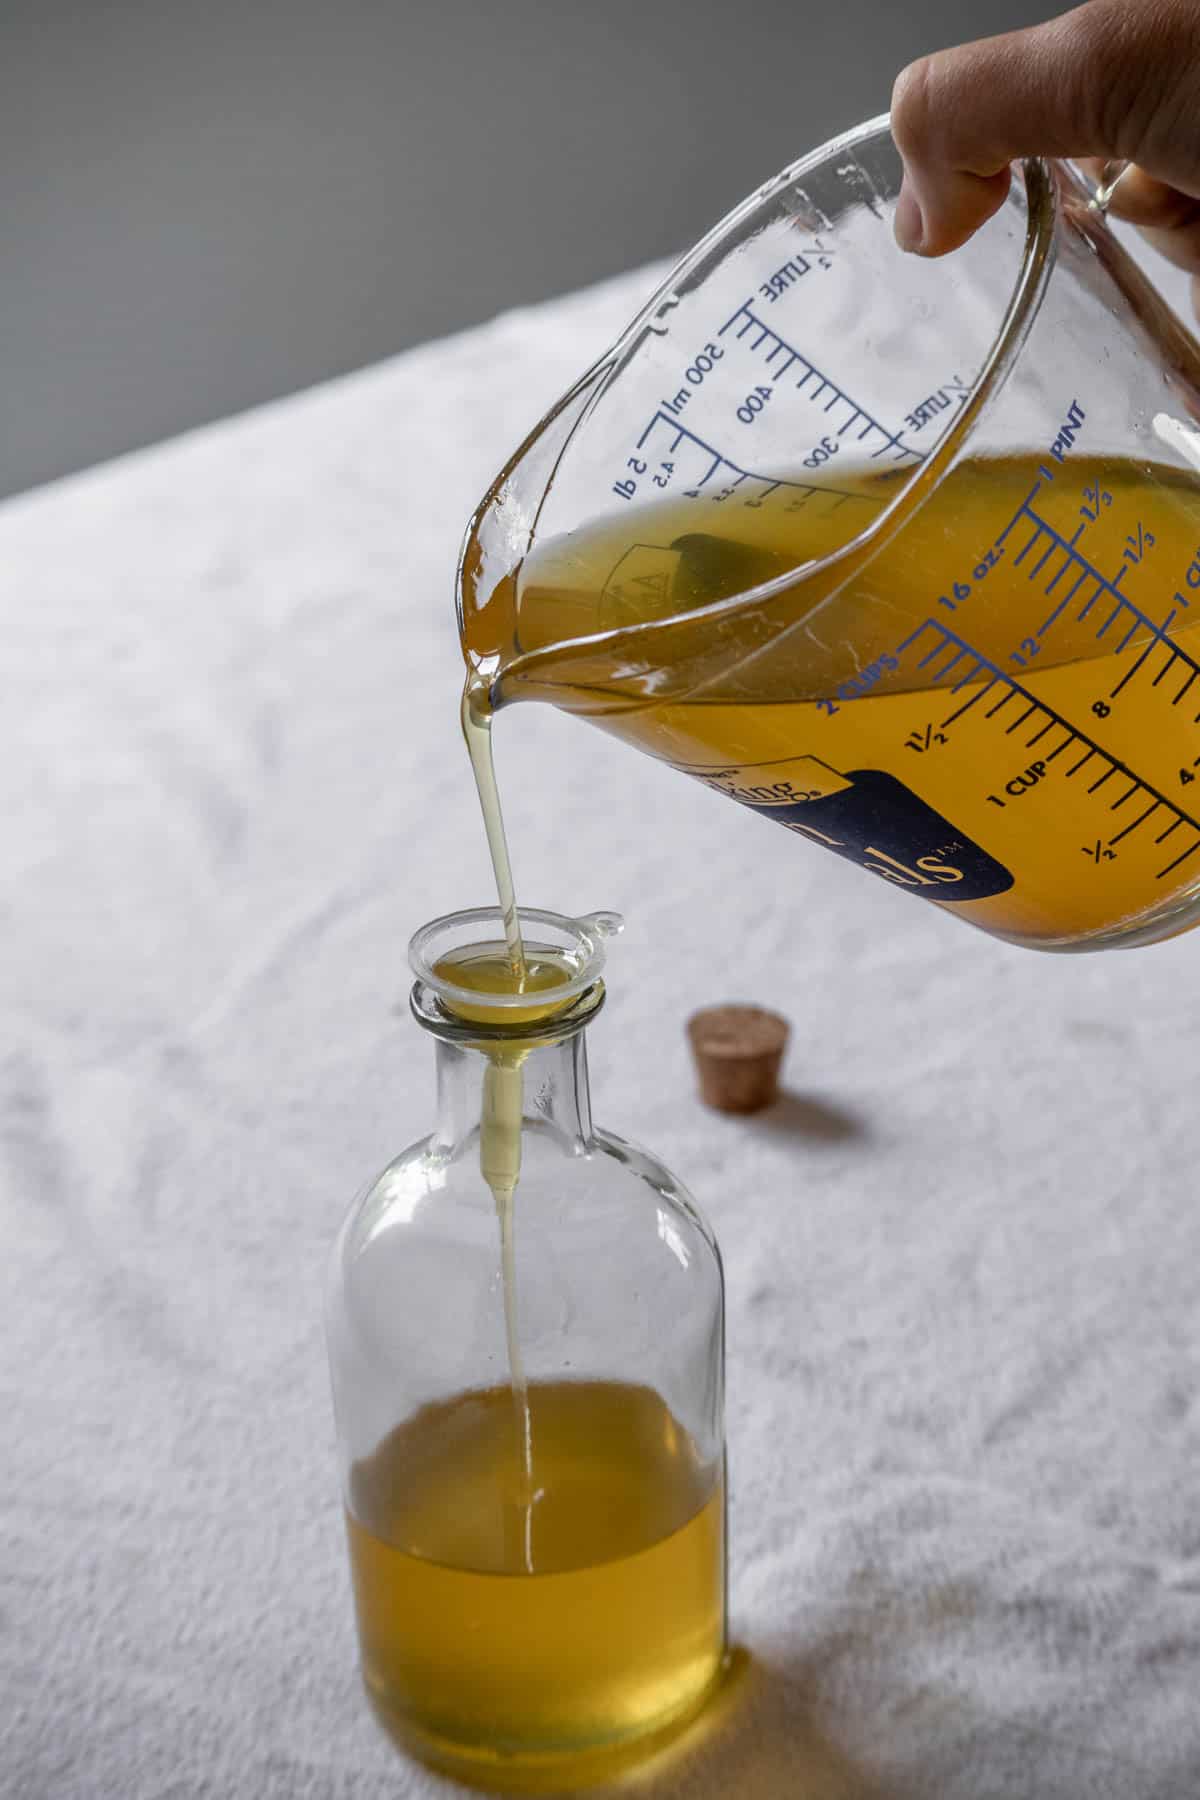 Homemade calendula oil being poured into a bottle